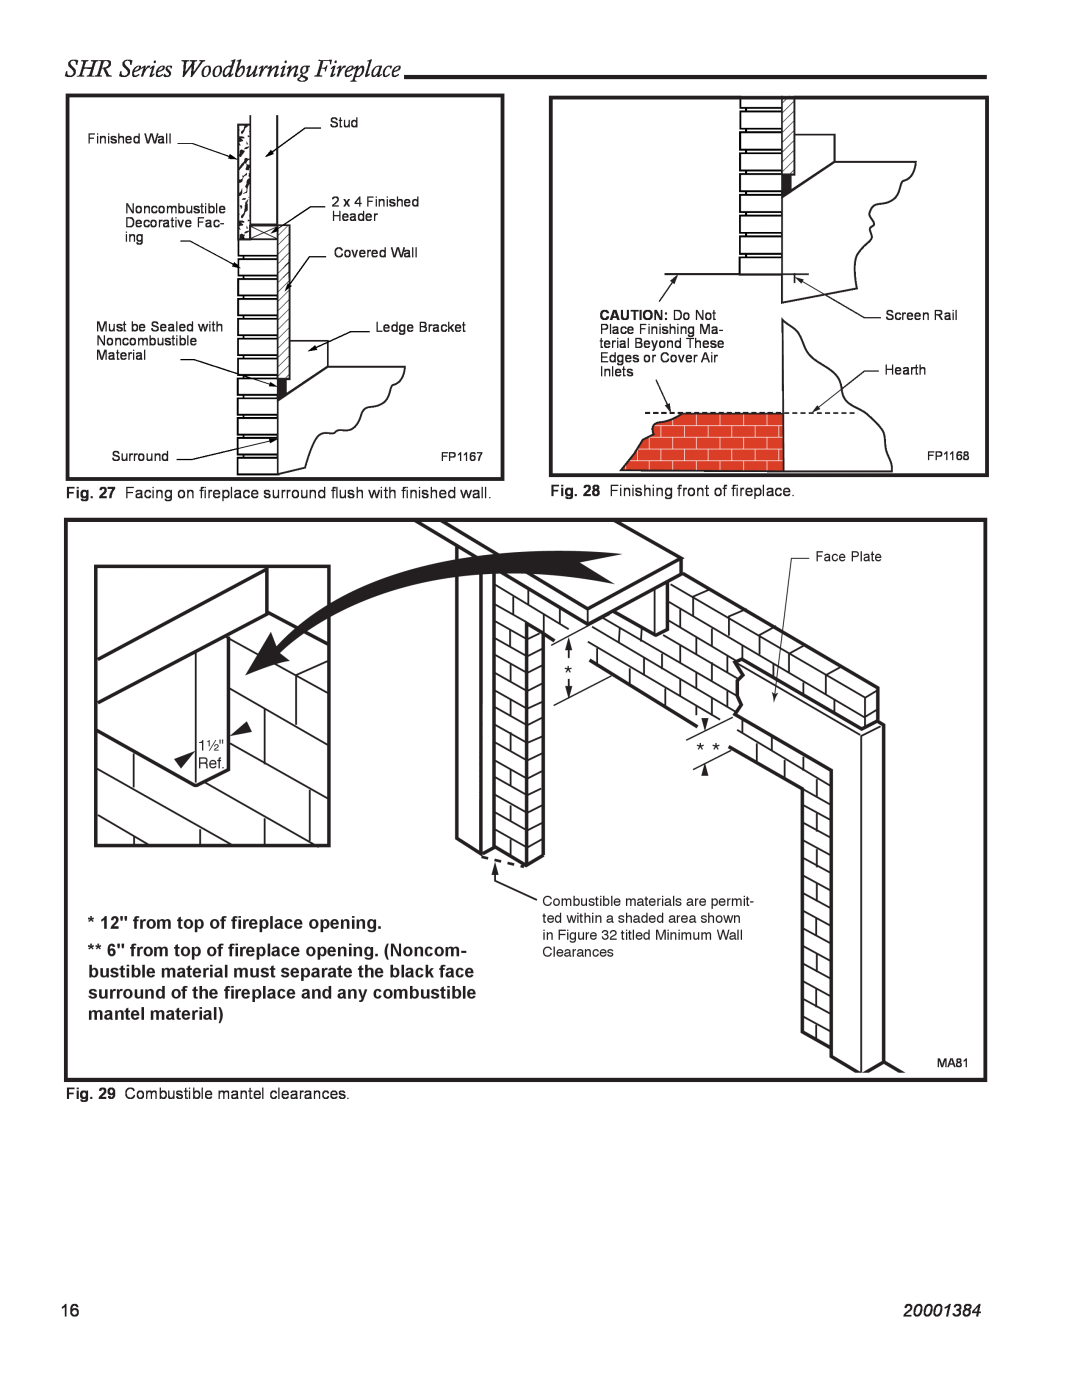 CFM Corporation SHR52 manual from top of ﬁreplace opening, SHR Series Woodburning Fireplace, 20001384, FP1167, FP1168, MA81 